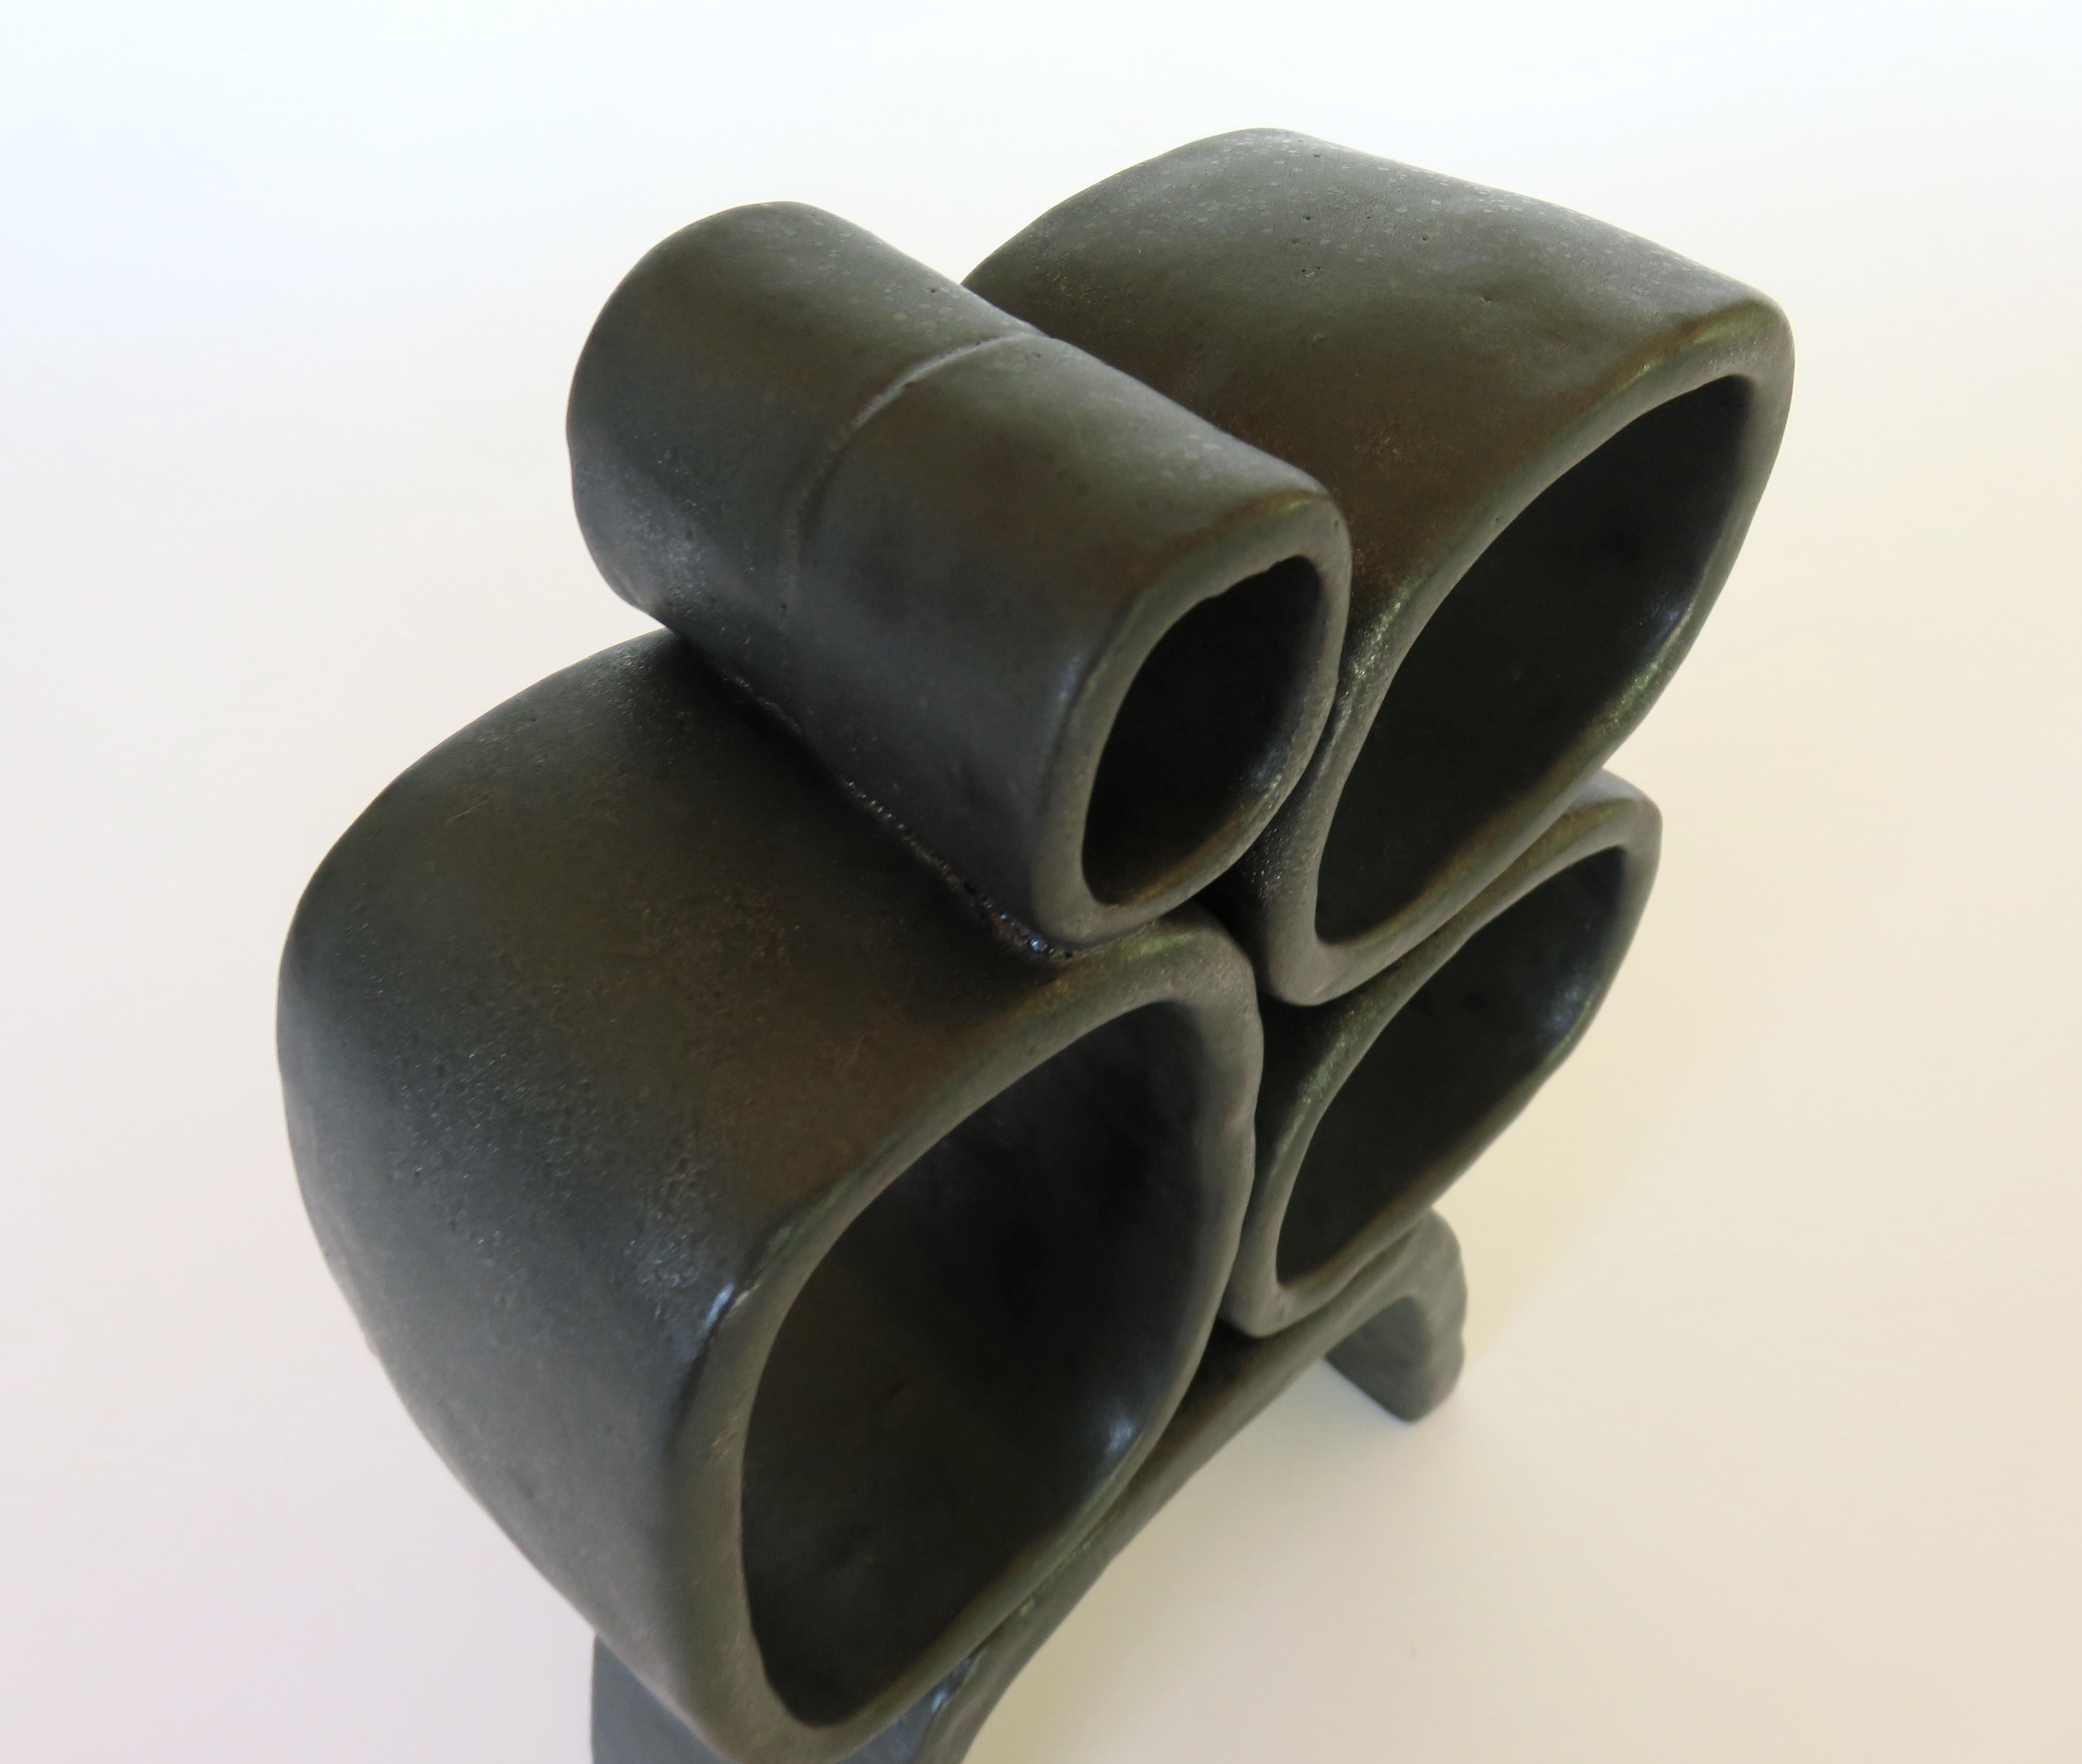 Contemporary Metallic Black Hand-Built Ceramic Sculpture with Hollow Rings on Angled Legs